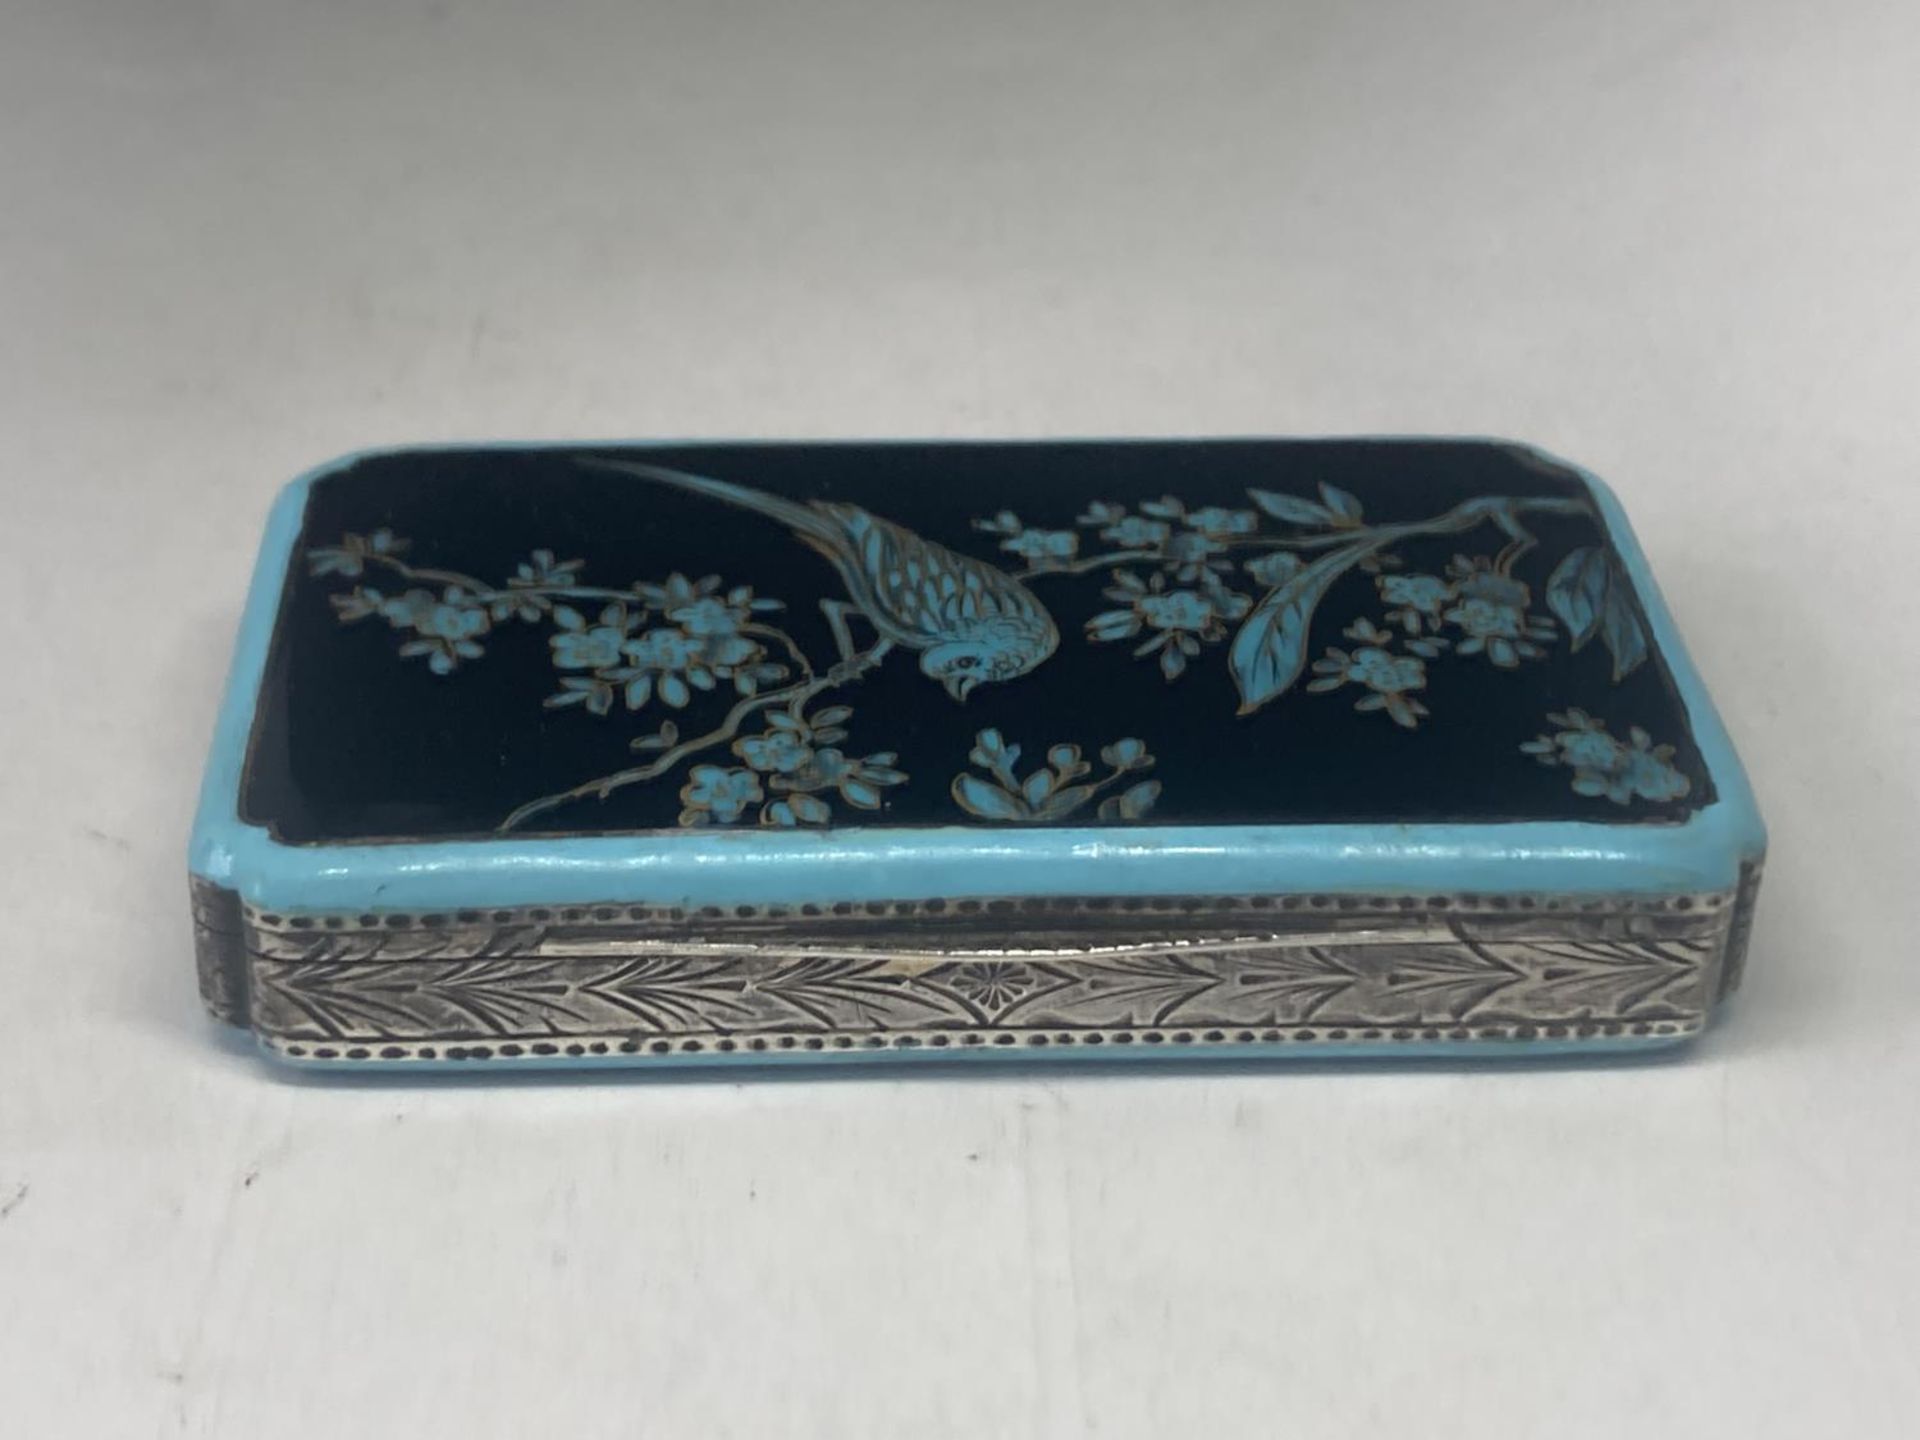 A SILVER AND ENAMEL TRINKET BOX WITH A TURQUOISE BLUE AND BLACK ORIENTAL BIRD DECORATION - Image 7 of 8